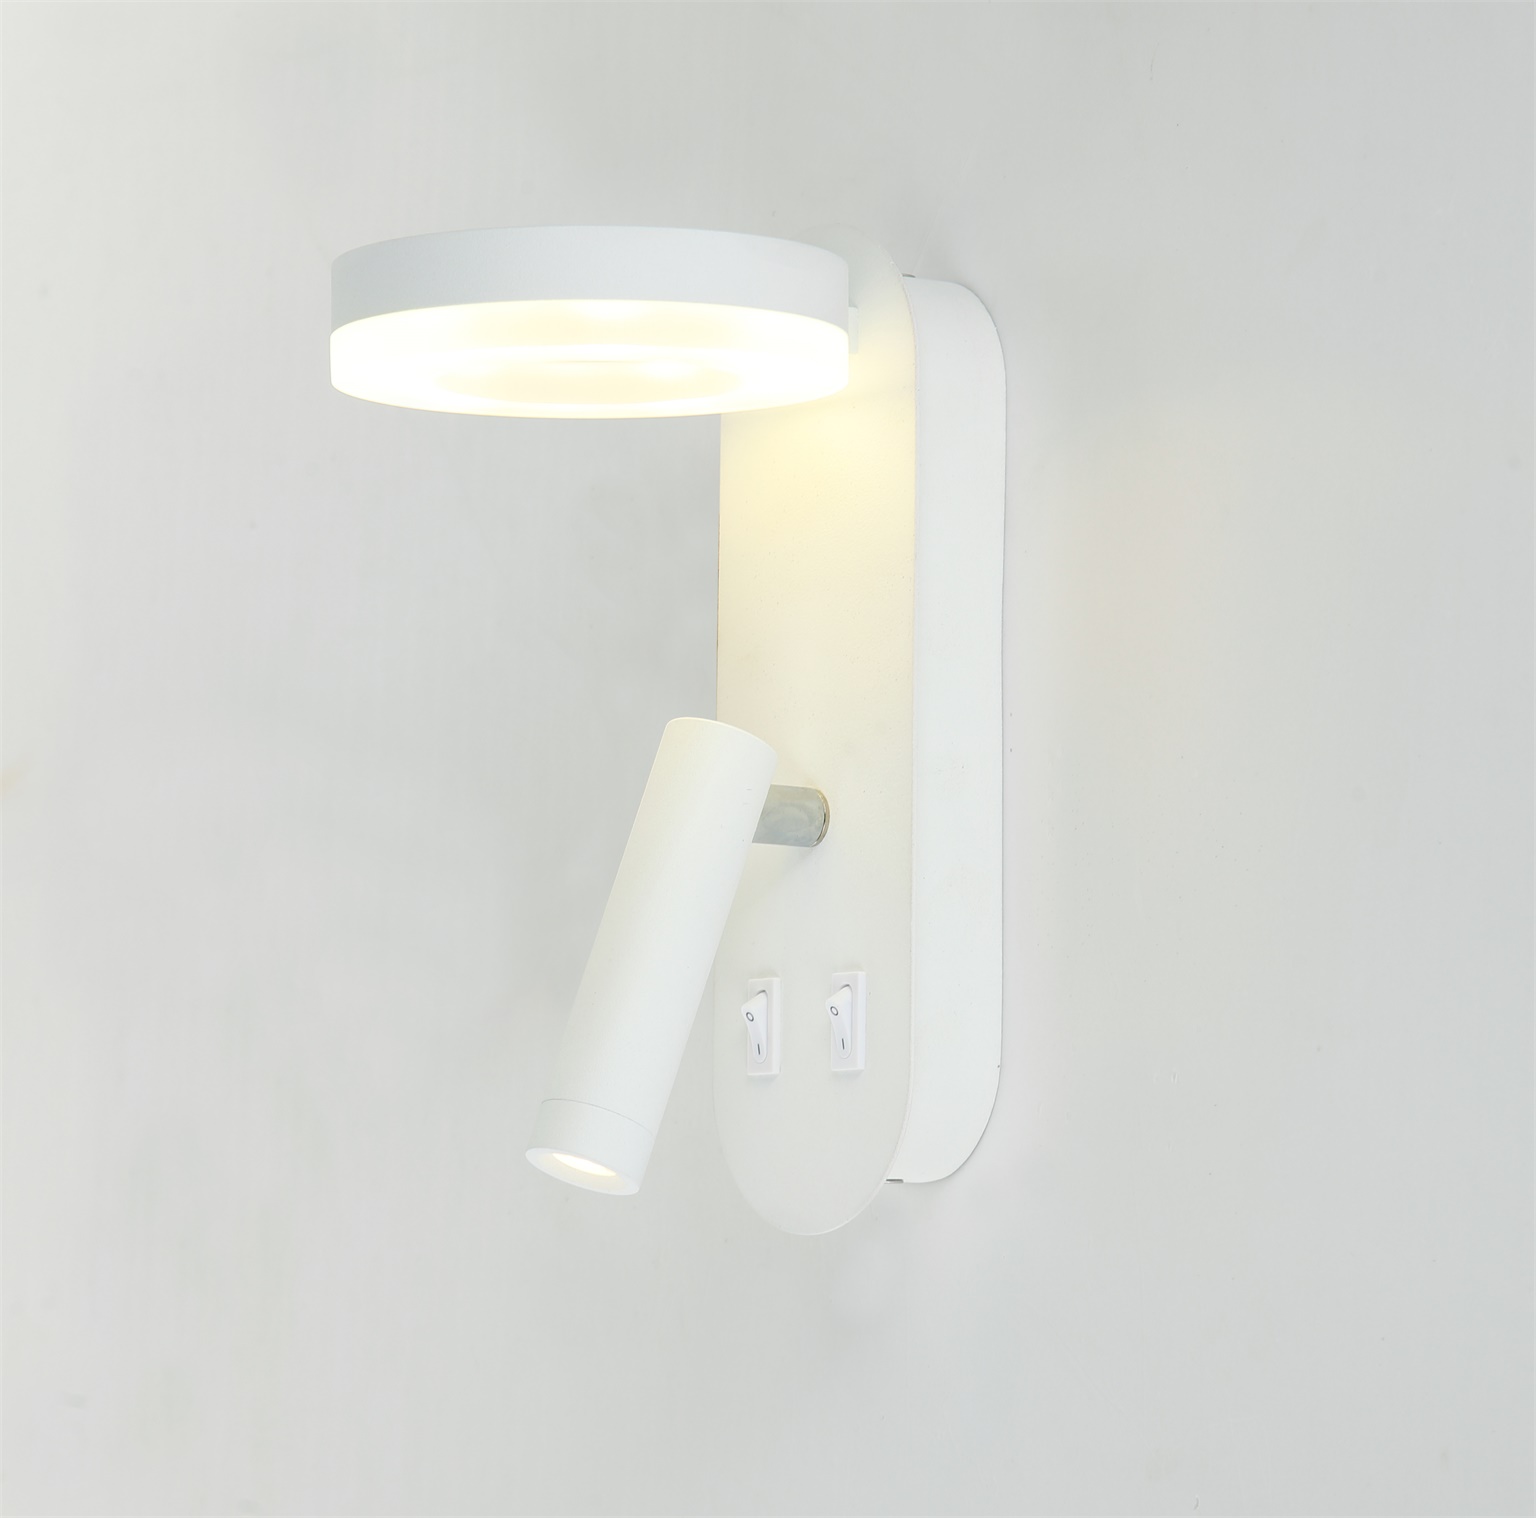 Saintly lights modern wall sconces at discount for kitchen-1